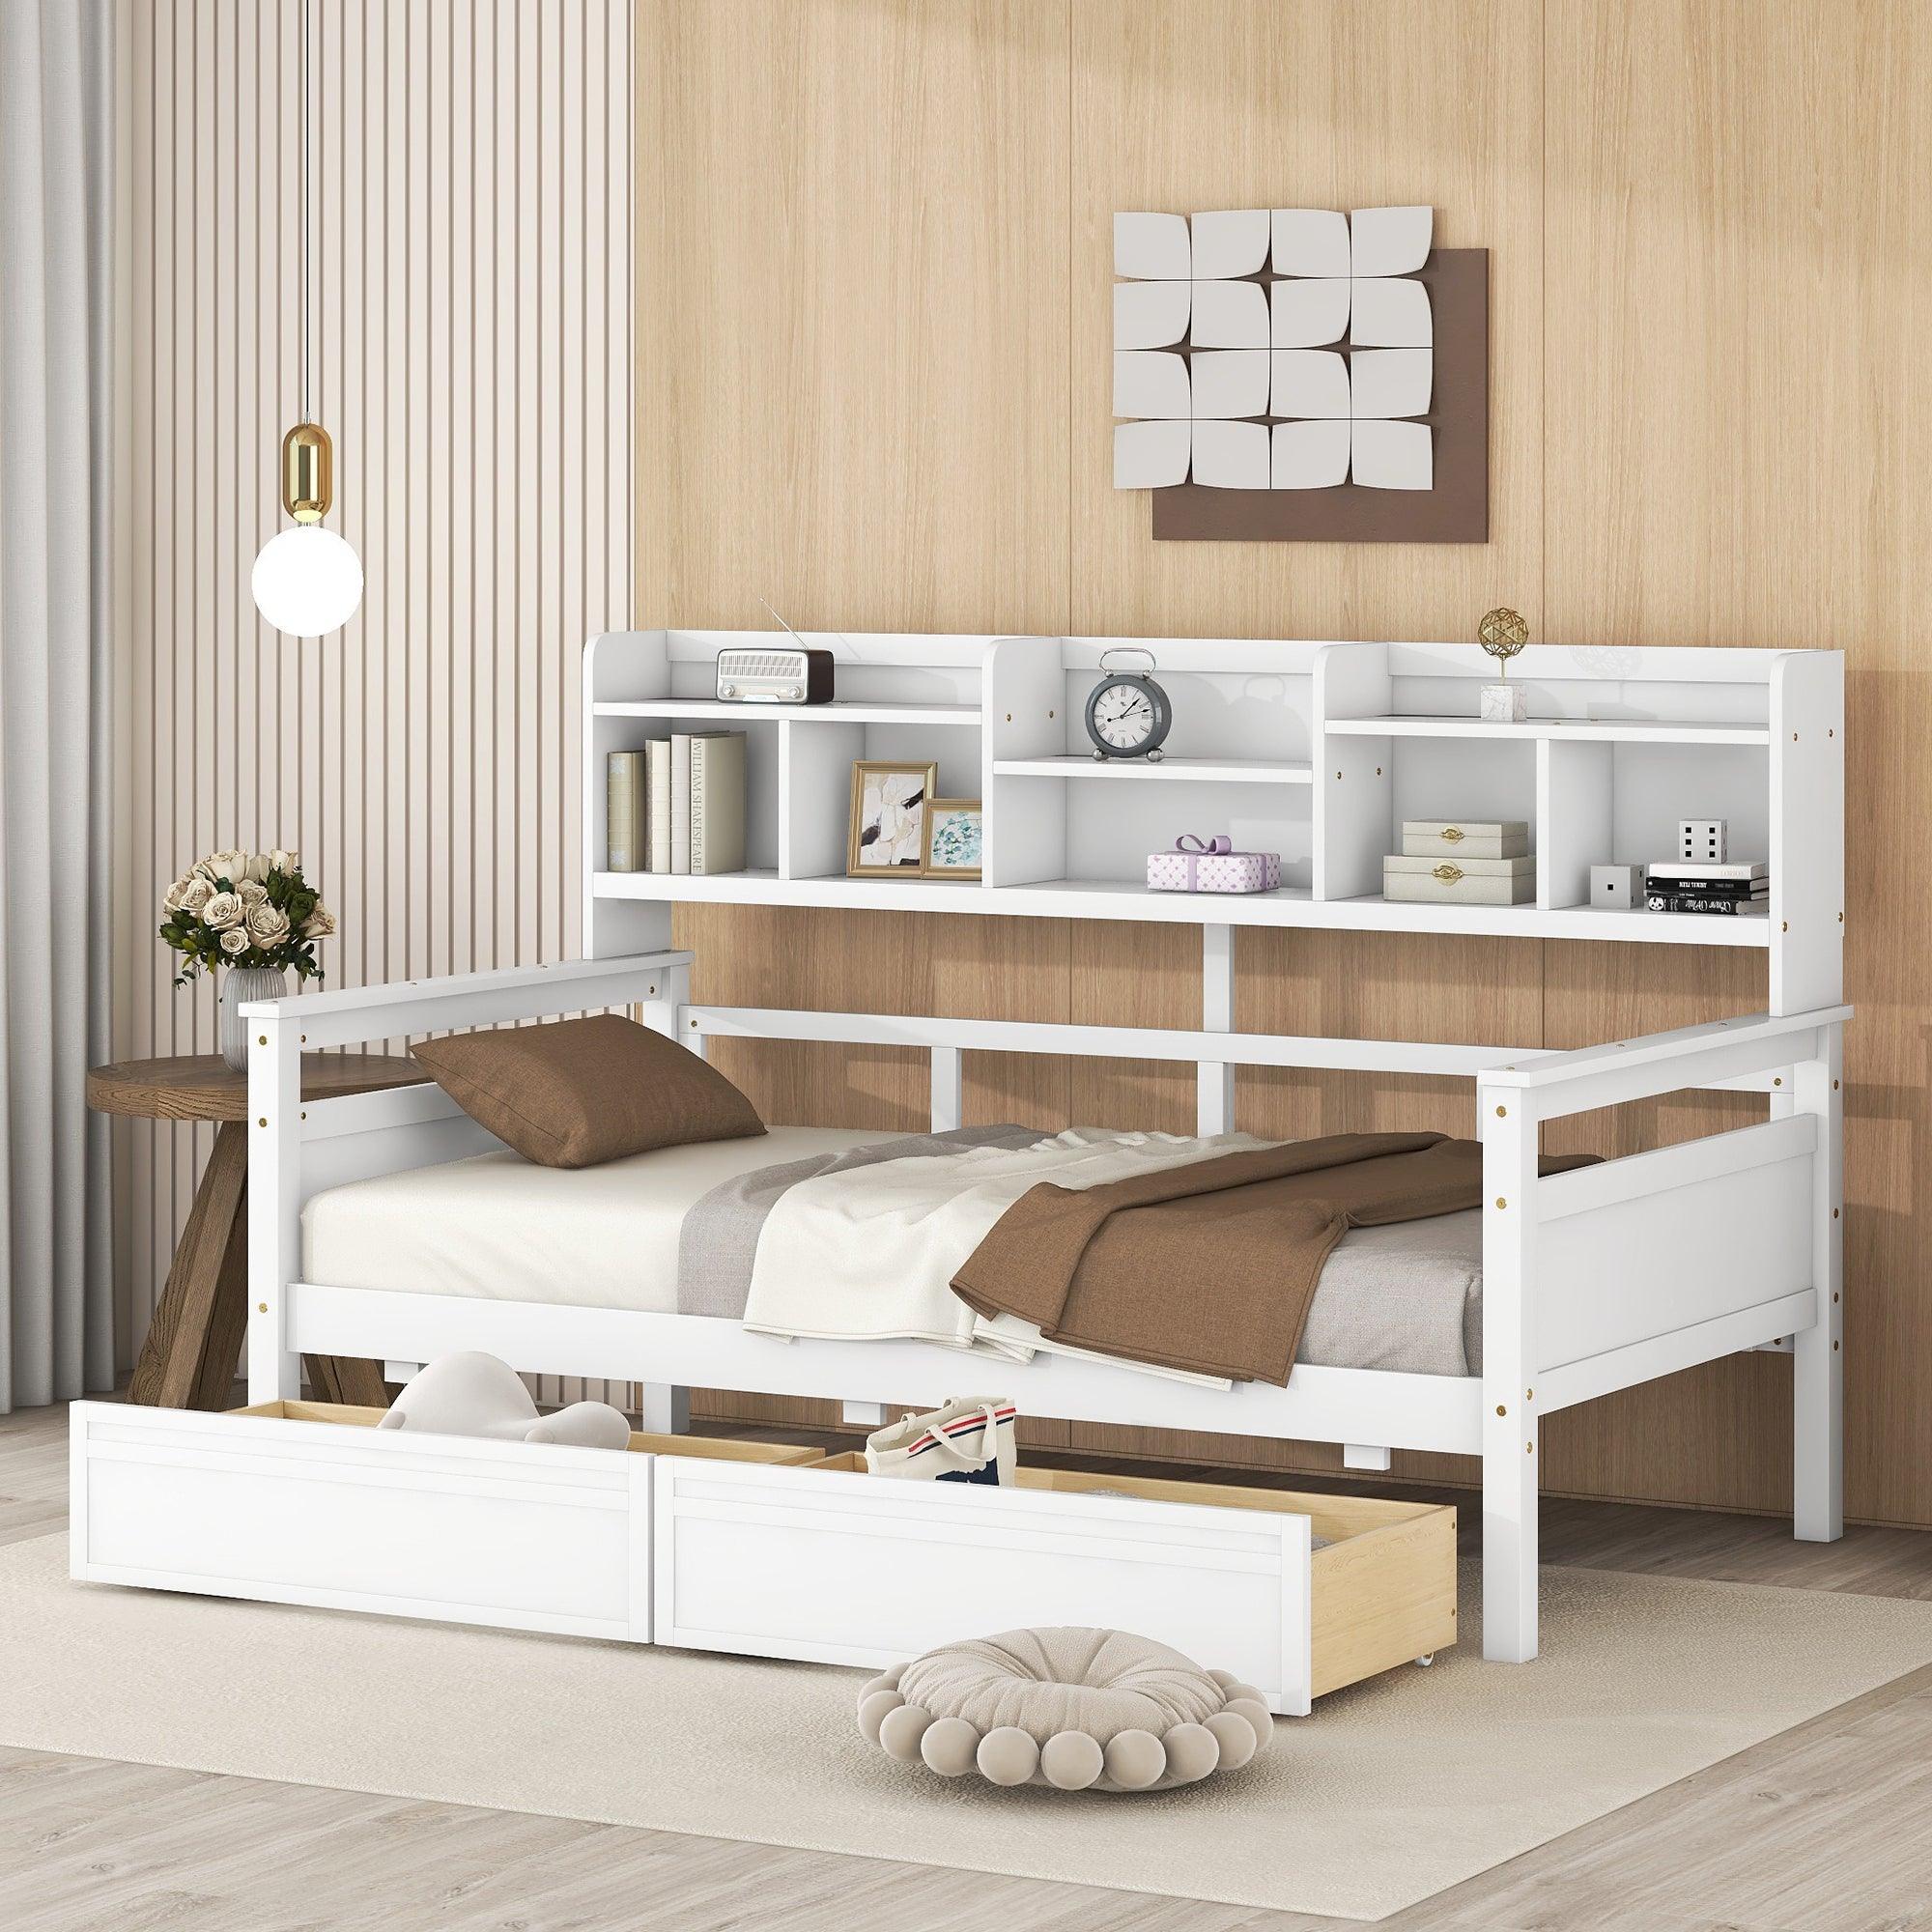 🆓🚛 Twin Size Daybed, Wood Slat Support, With Bedside Shelves & Two Drawers, White